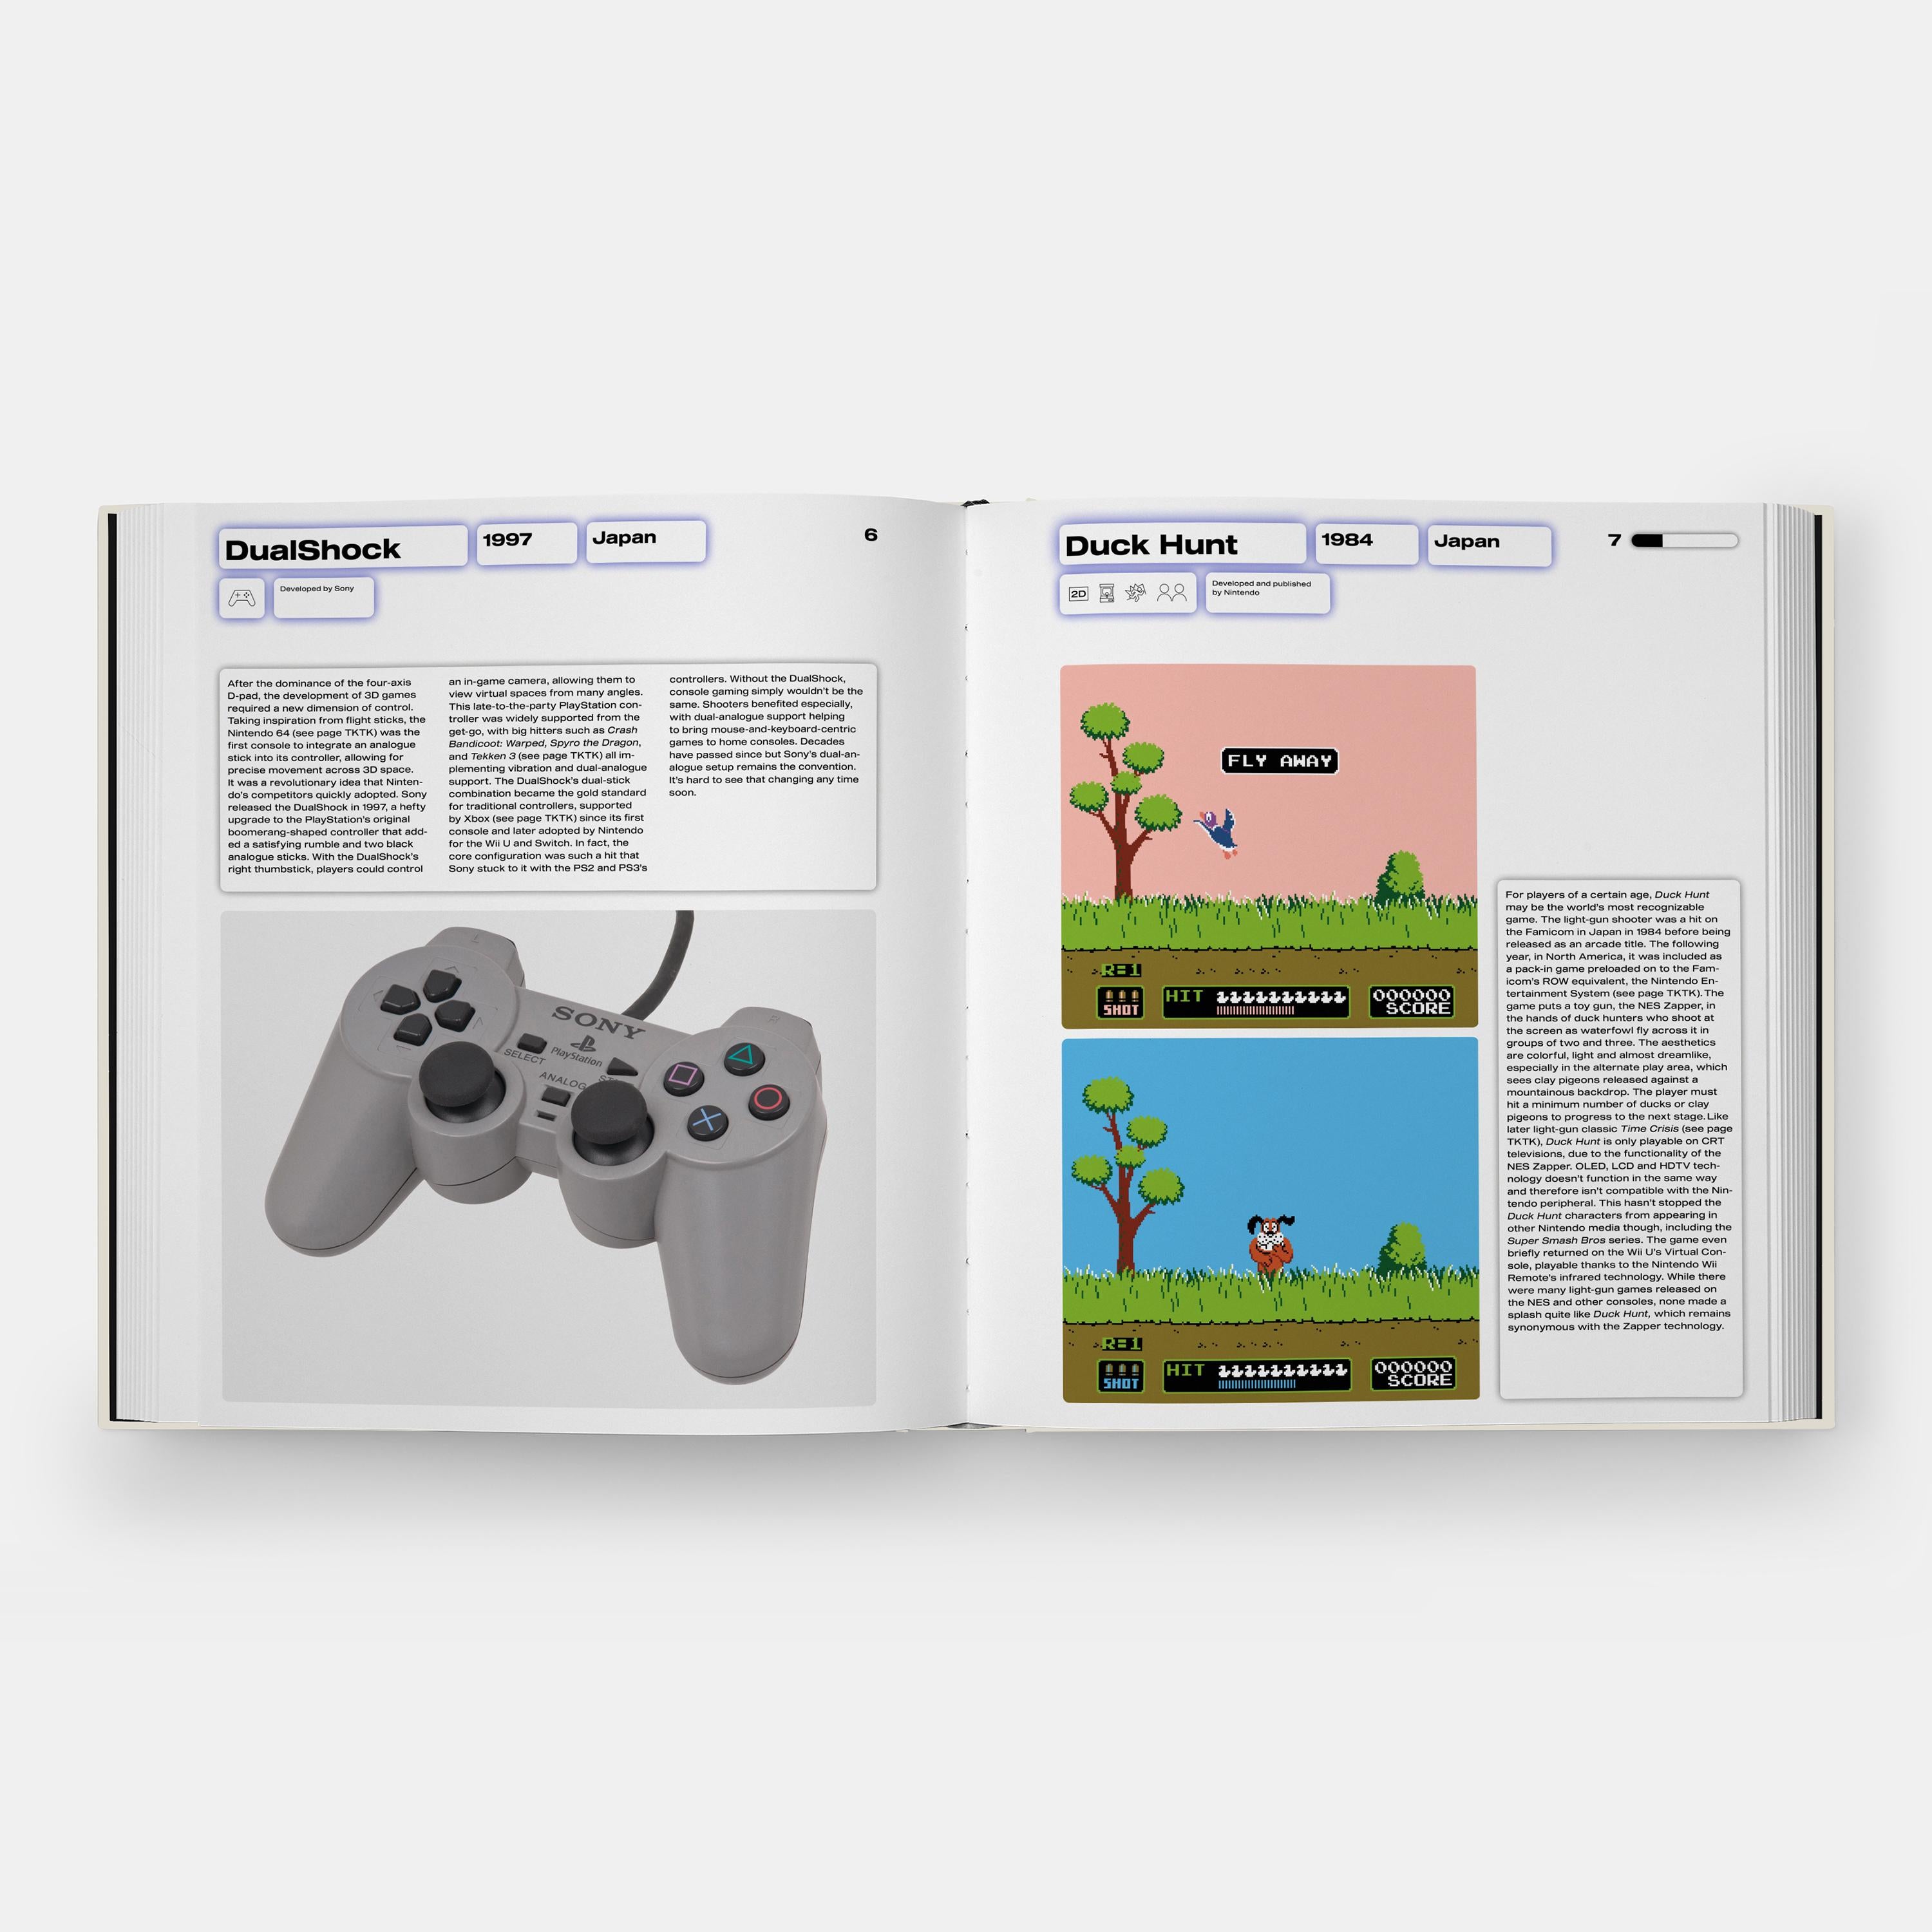 An A to Z of video games – 300 entries showcasing the most influential and celebrated games, consoles, publishers, and more

A visual history of all things video games, this book will provide the reader with an overview of the gaming industry, from